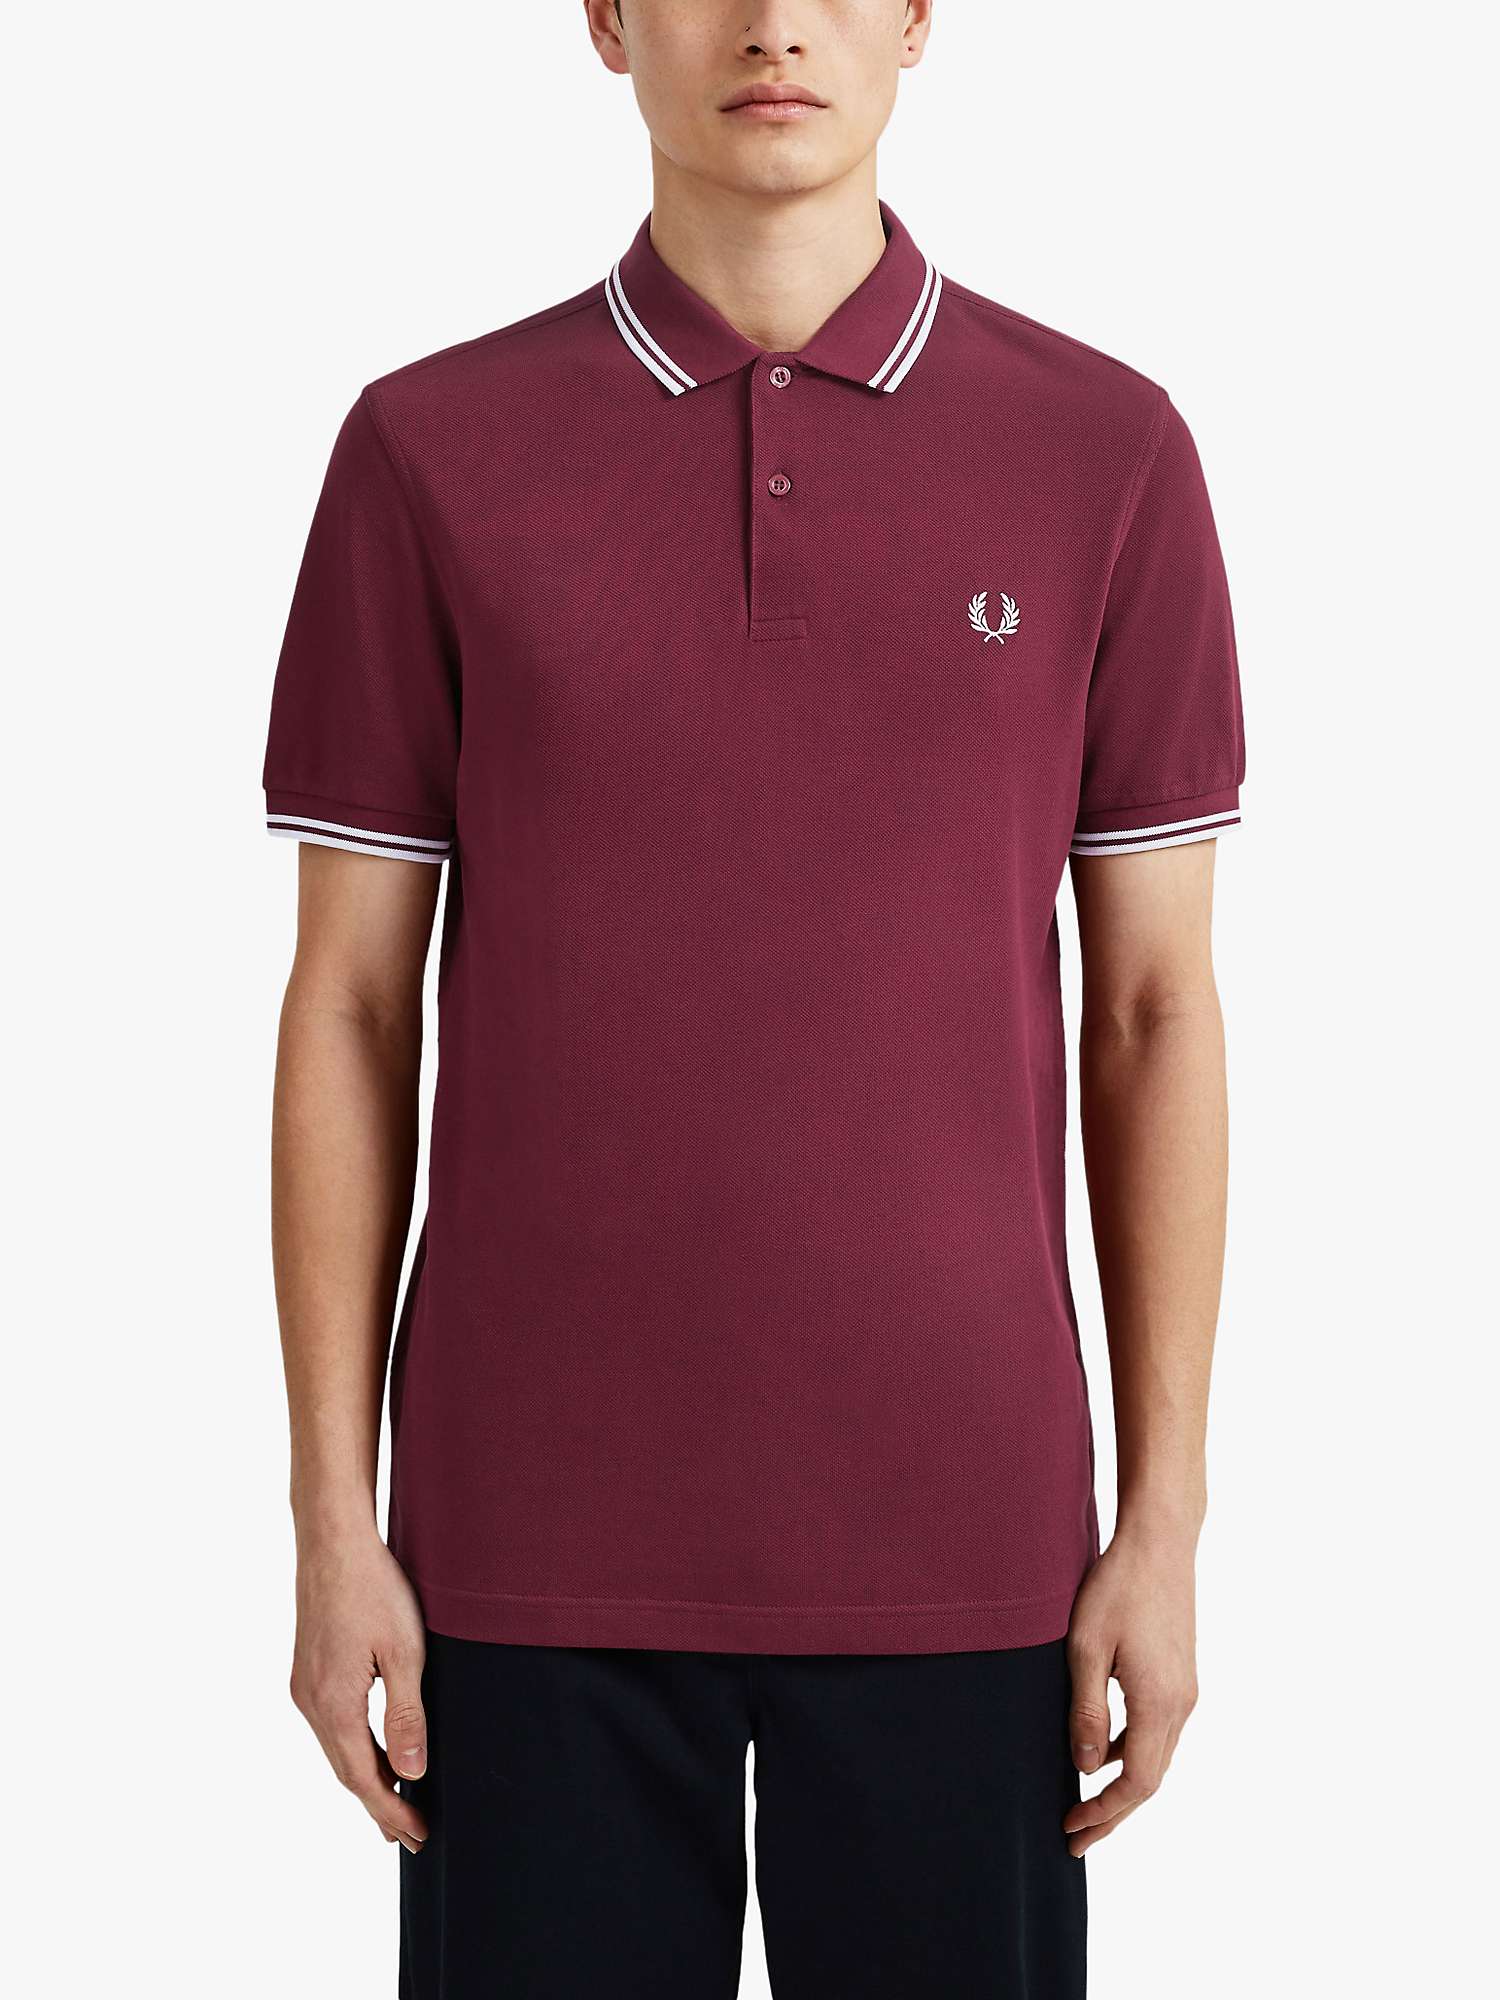 Fred Twin Tipped Fit Polo Shirt, Red at Lewis & Partners